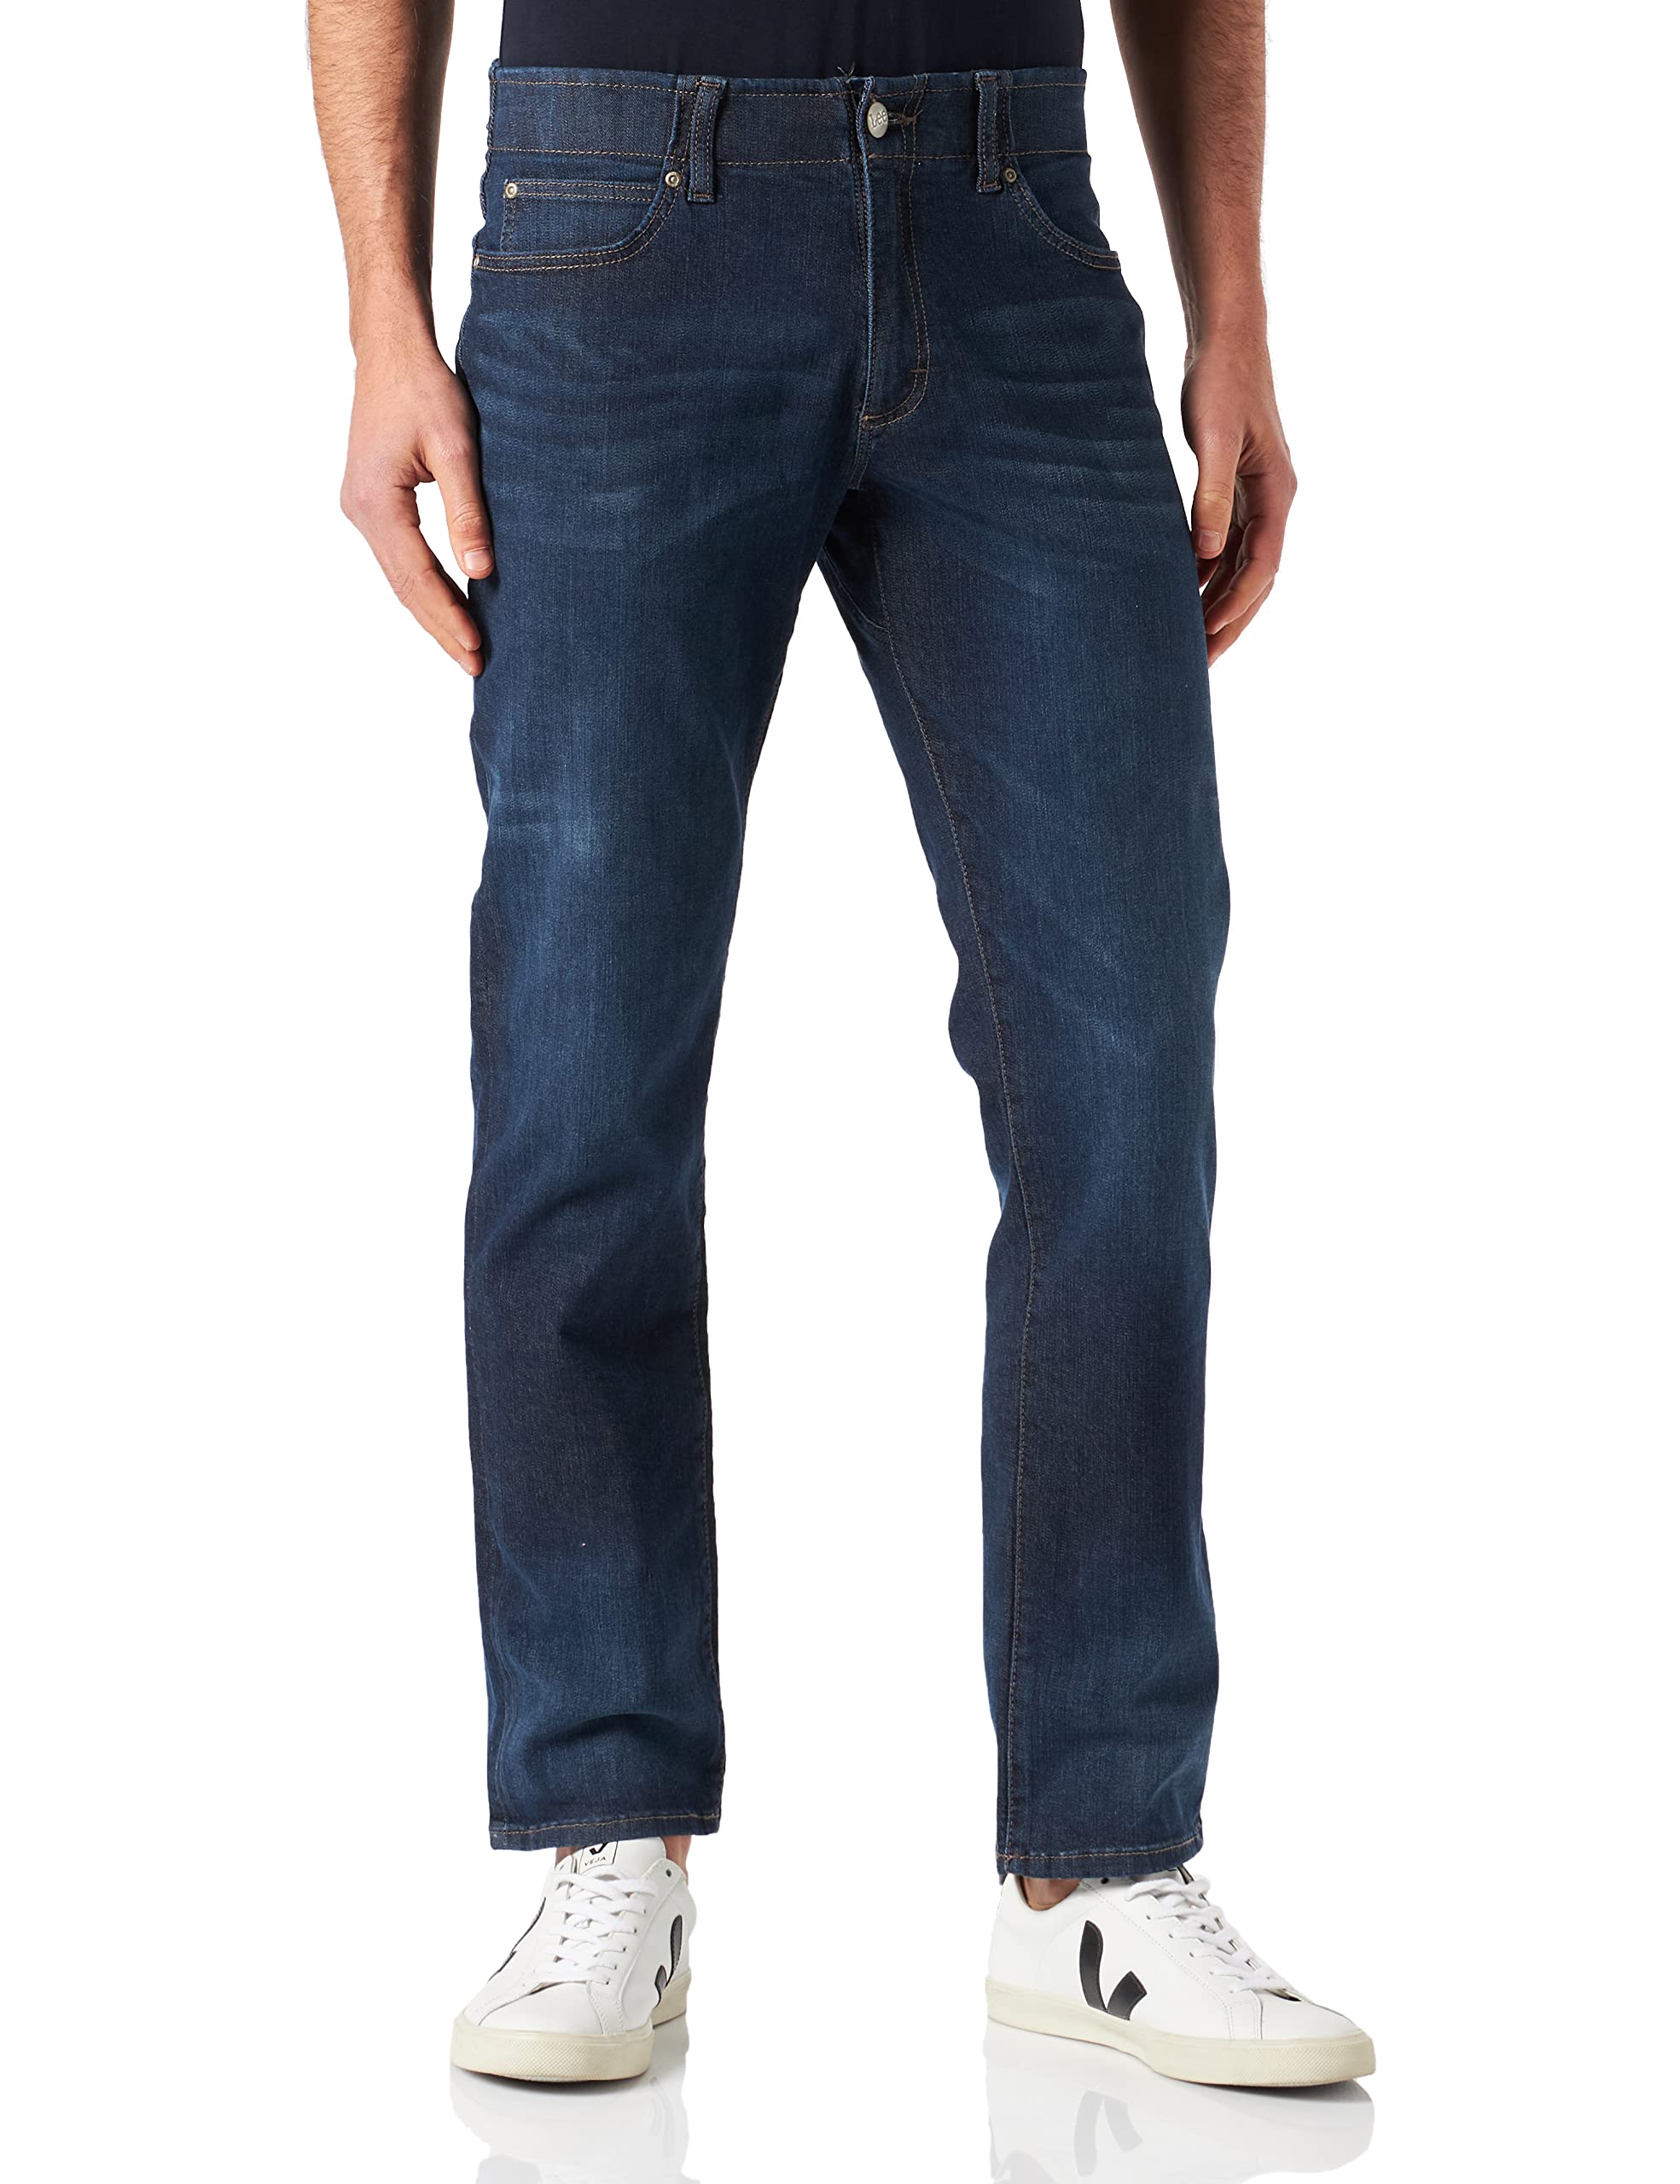 Lee Herren Straight Fit Xm Extreme Motion Jeans, Trip, 34W / 34L